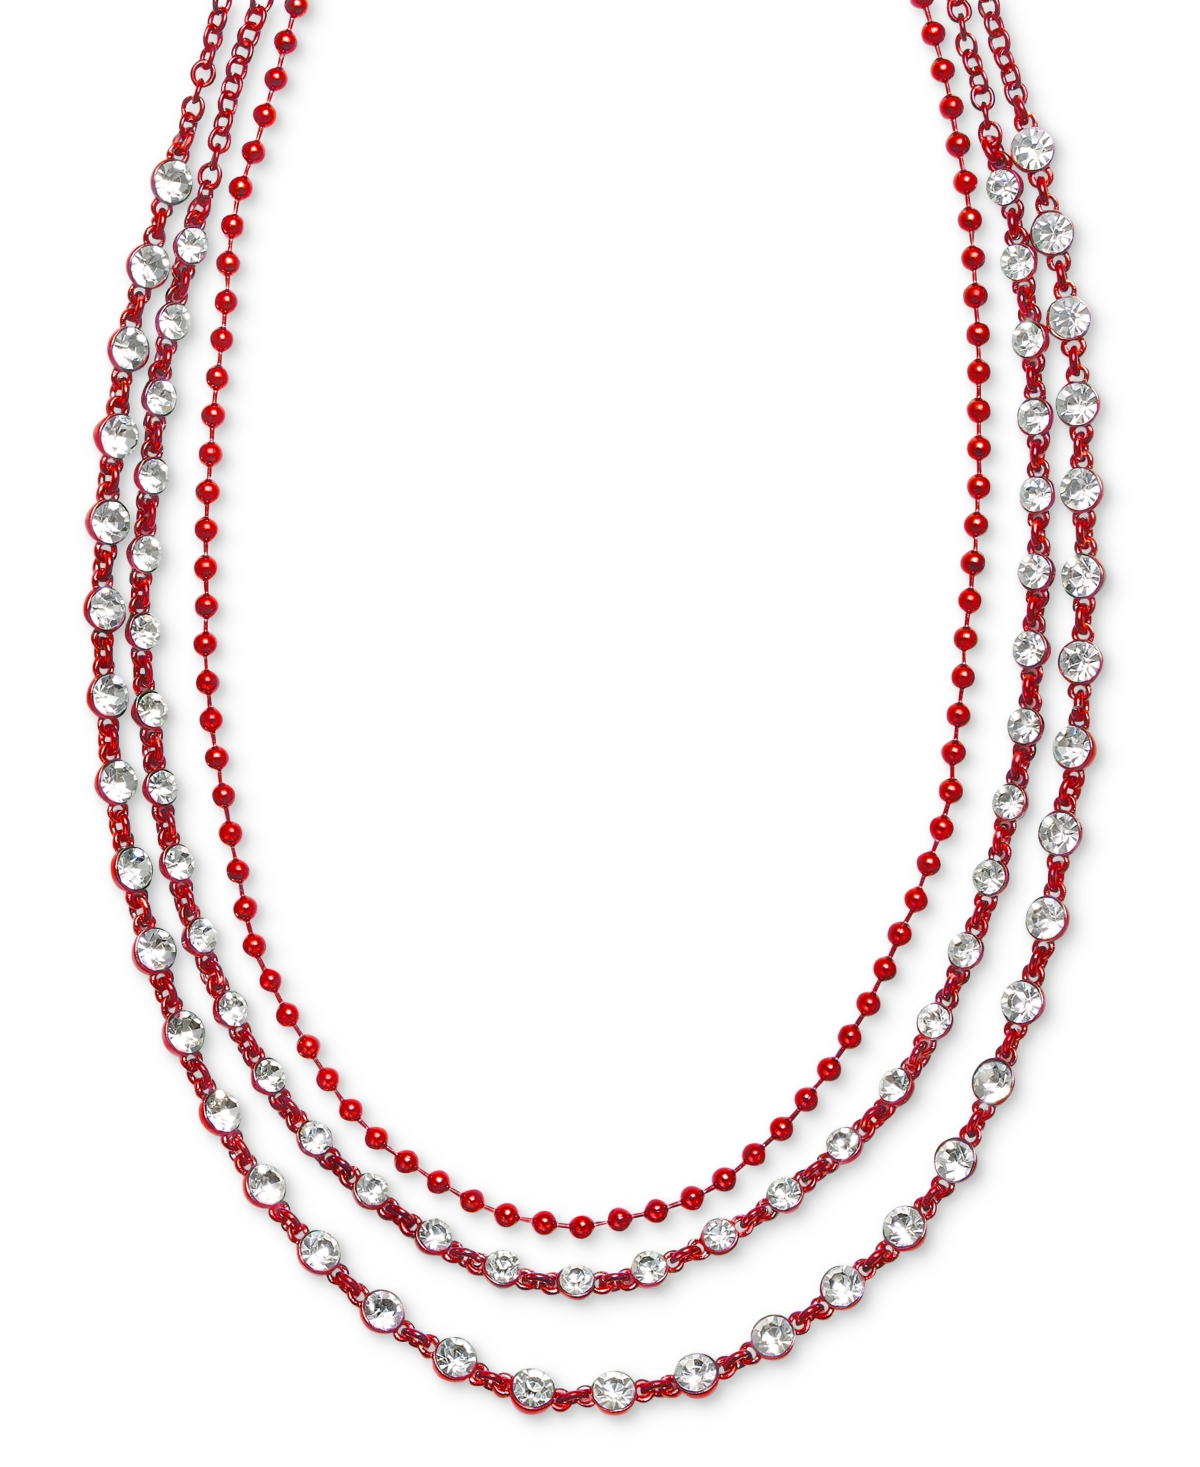 Crystal & Bead Layered Collar Necklace, 17" + 3" extender, Created for Macy's - Red